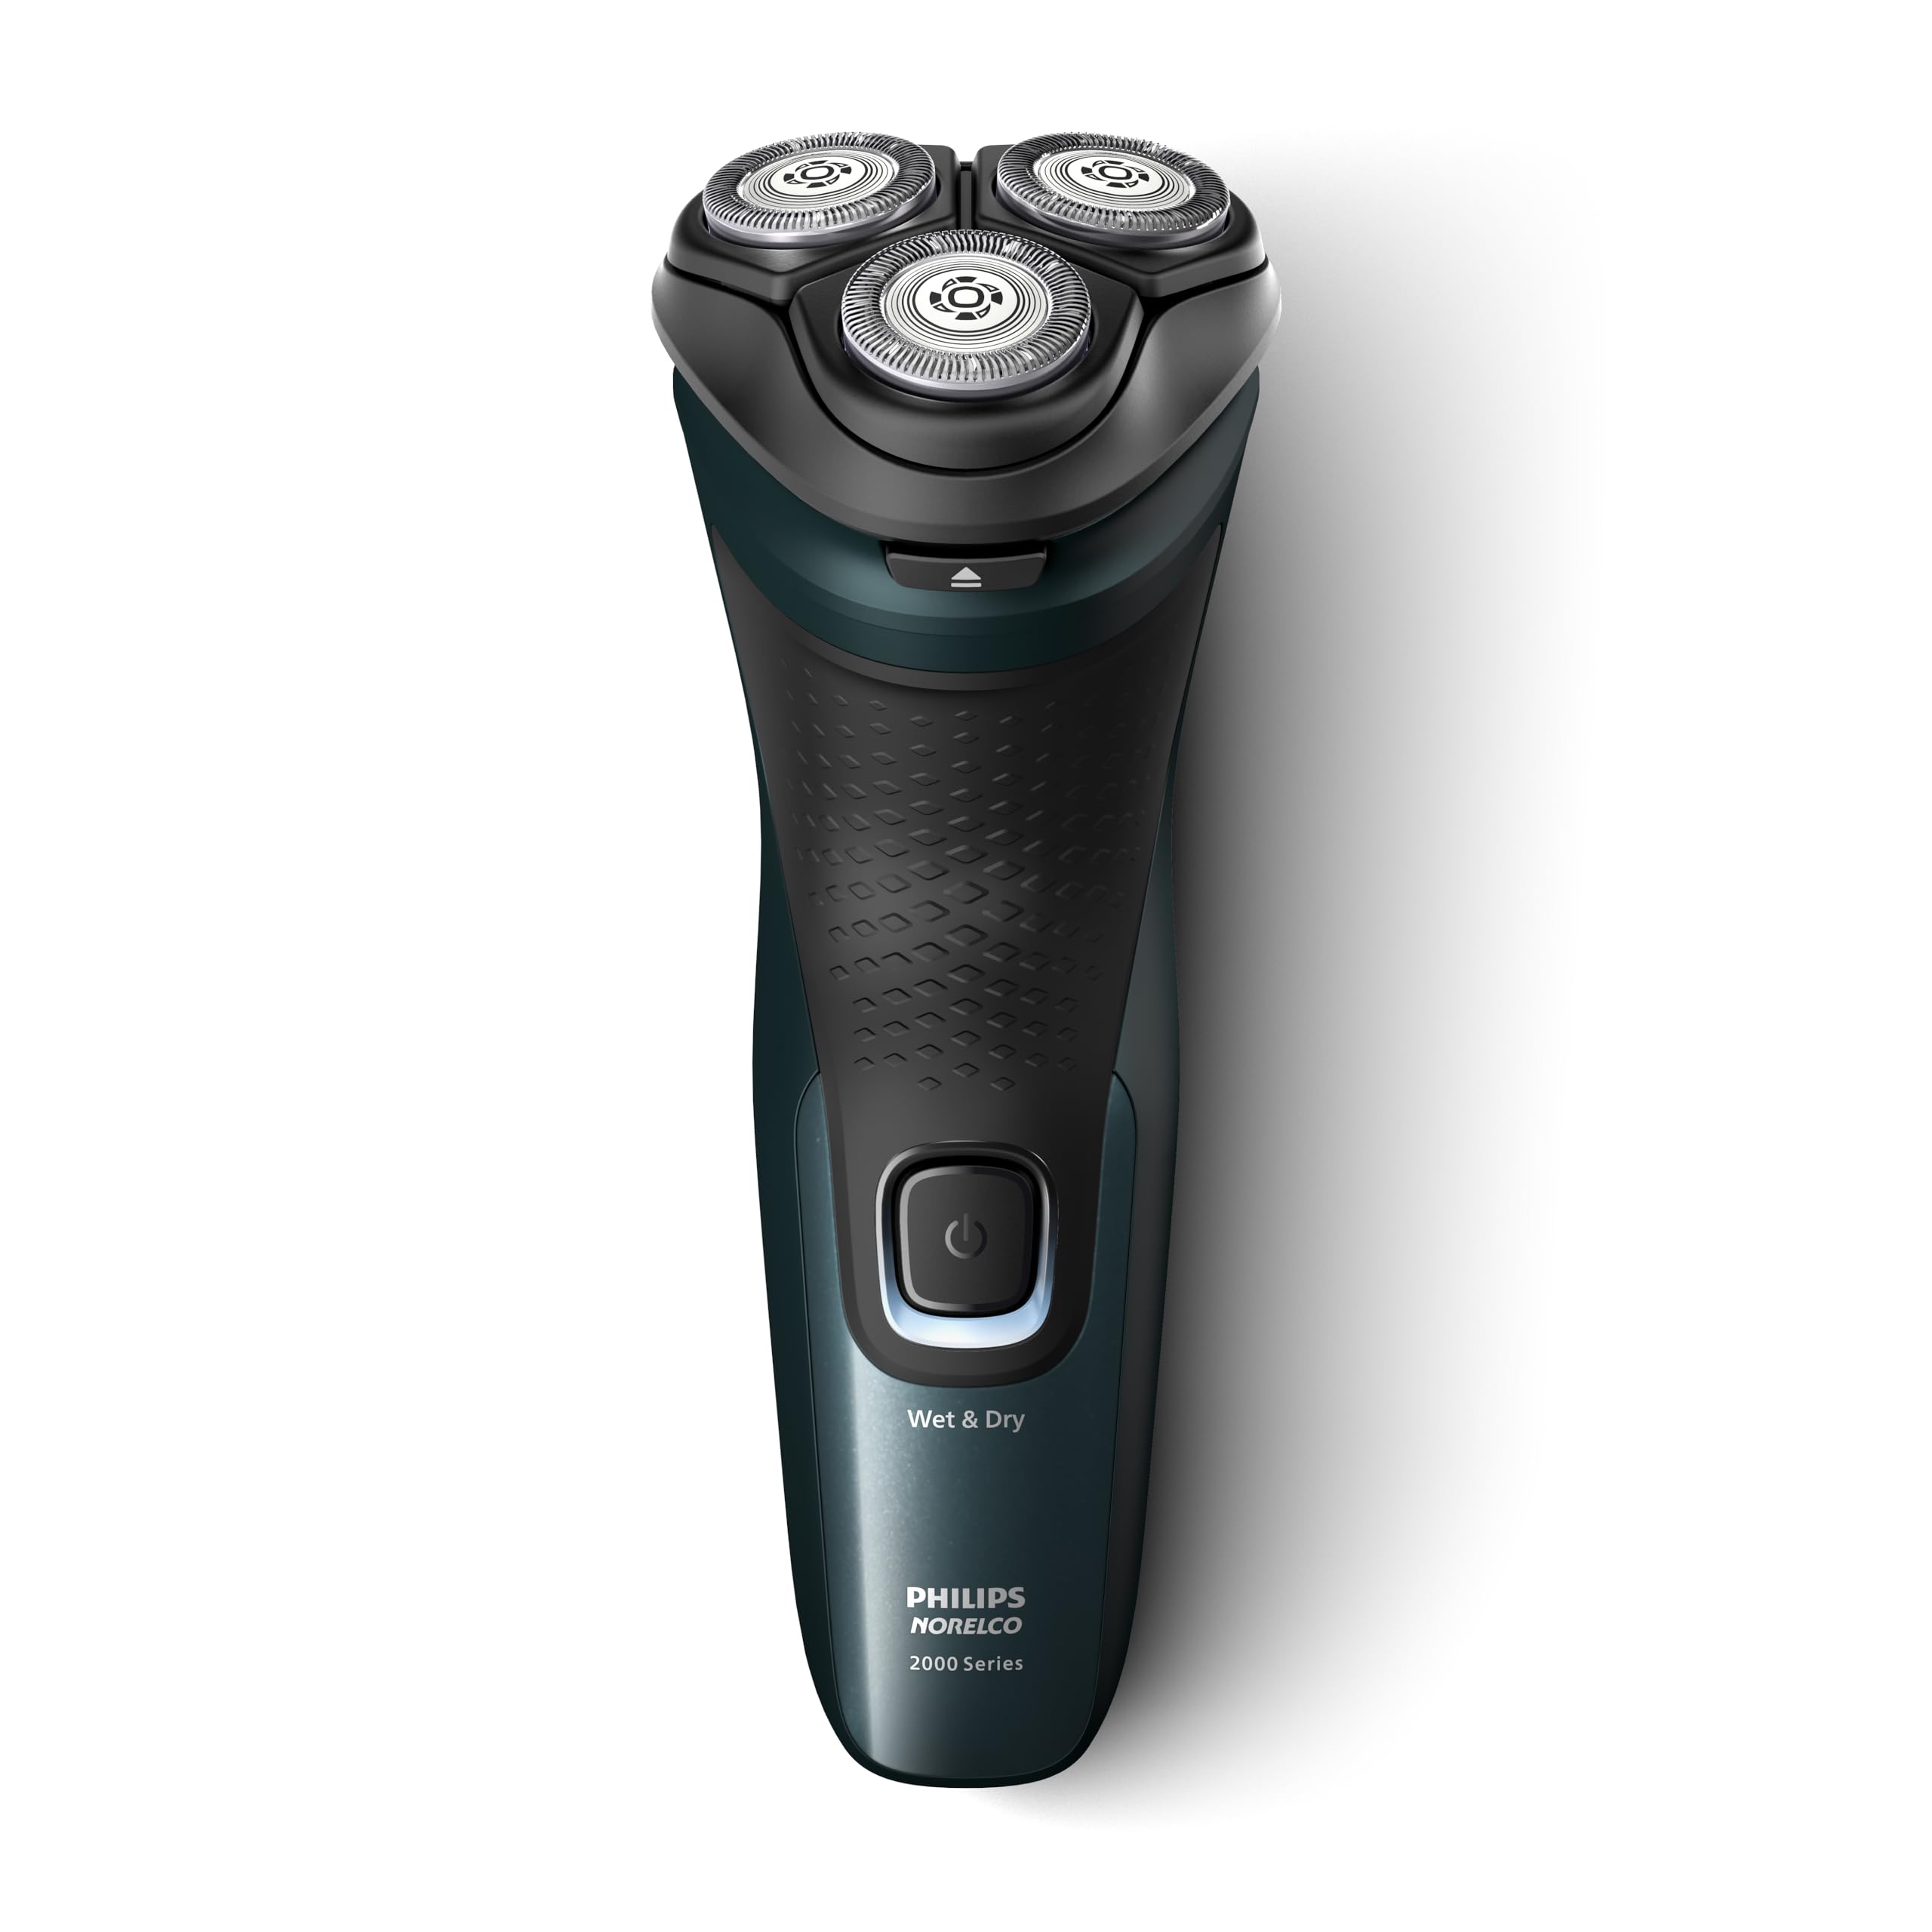 Philips Norelco Shaver 2600, Corded and Rechargeable Cordless Electric Shaver with Pop-Up Trimmer, X3052/91